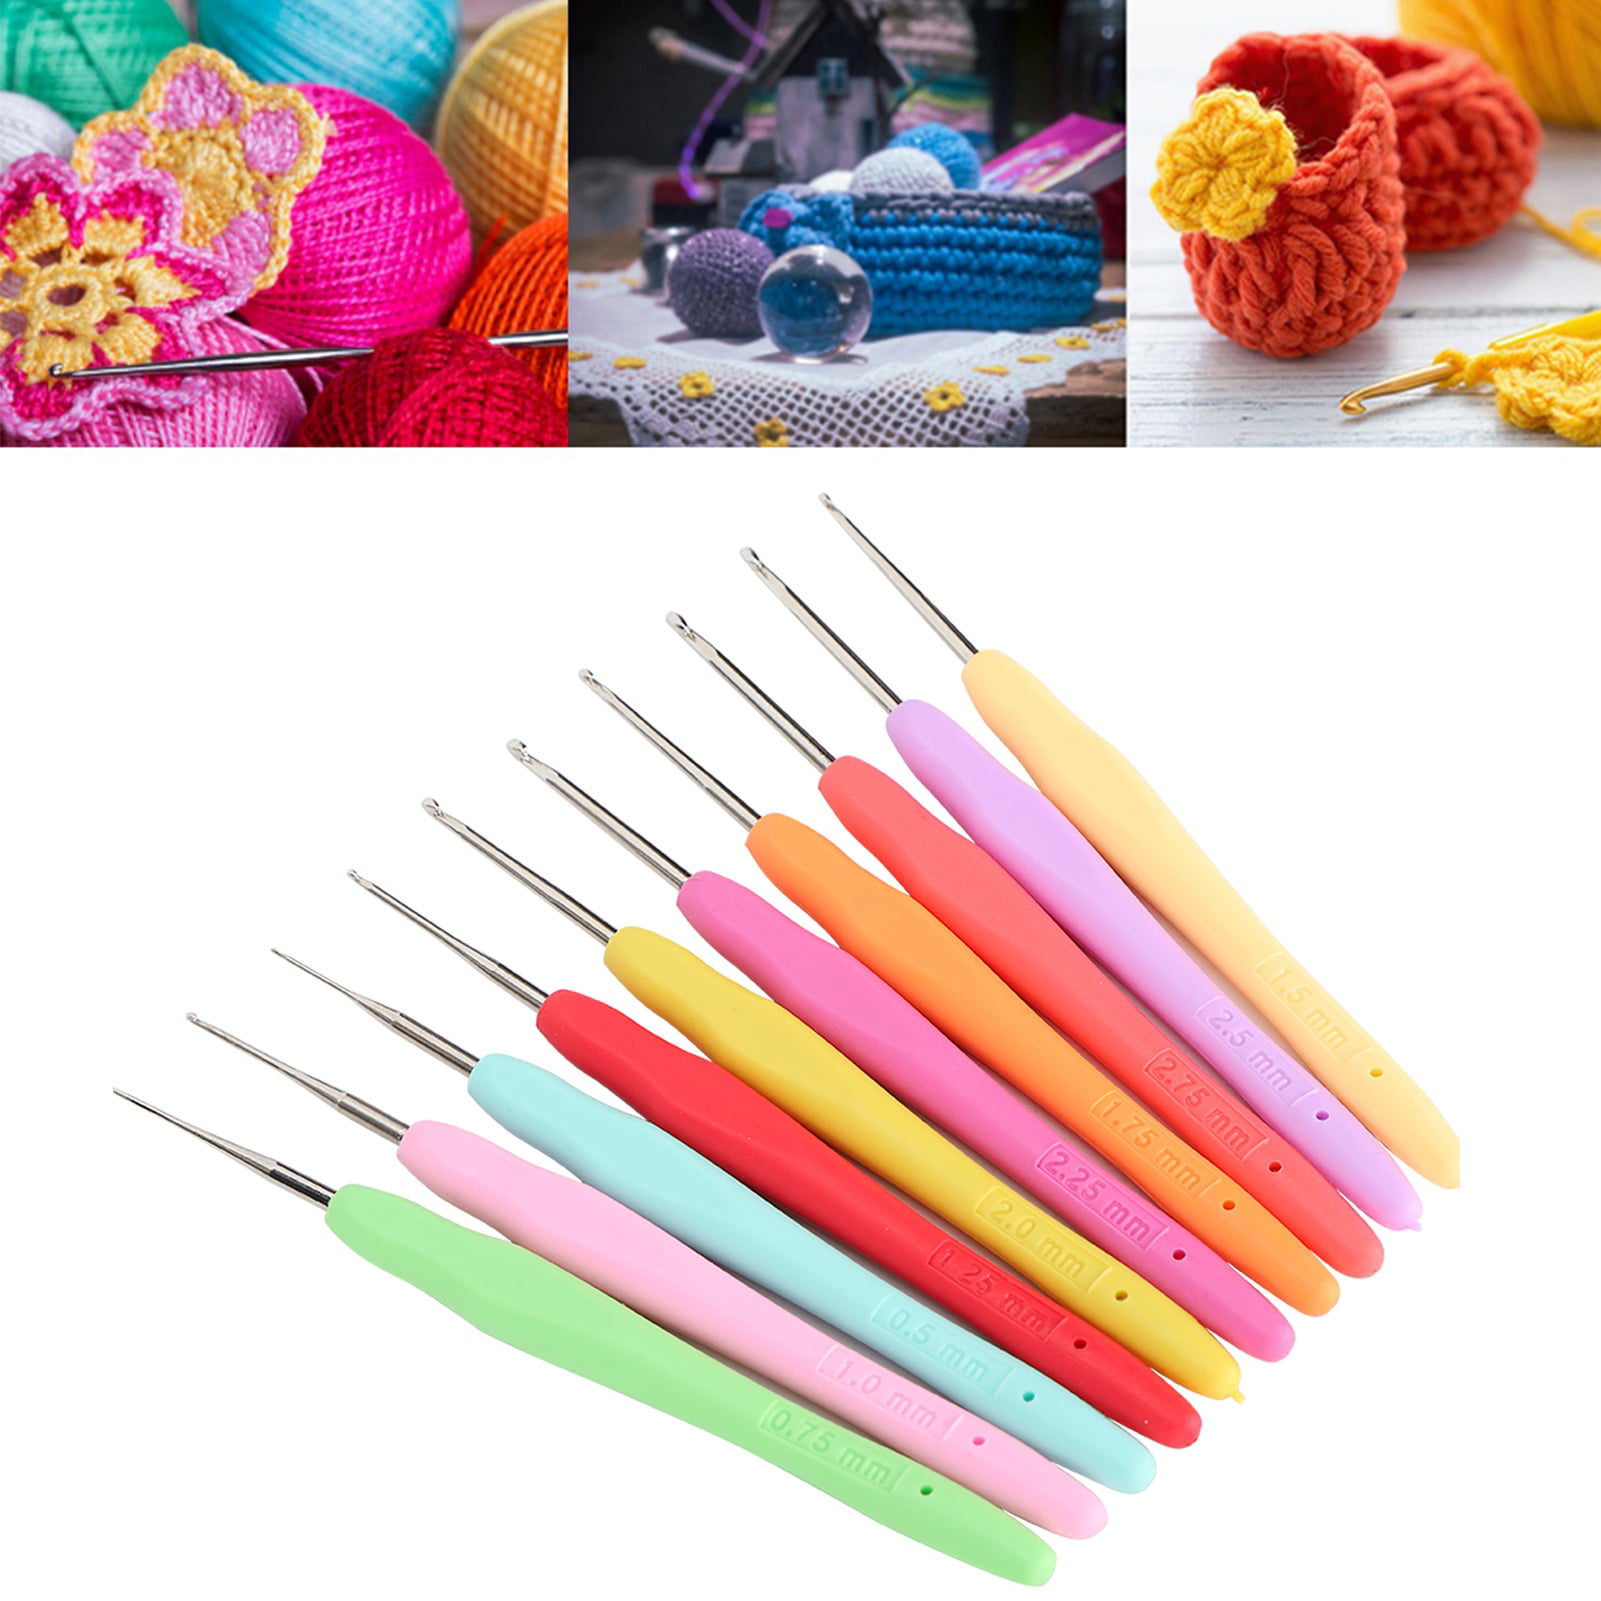 Best Crochet Hooks for Carpal Tunnel and Hand Health - ChristaCoDesign